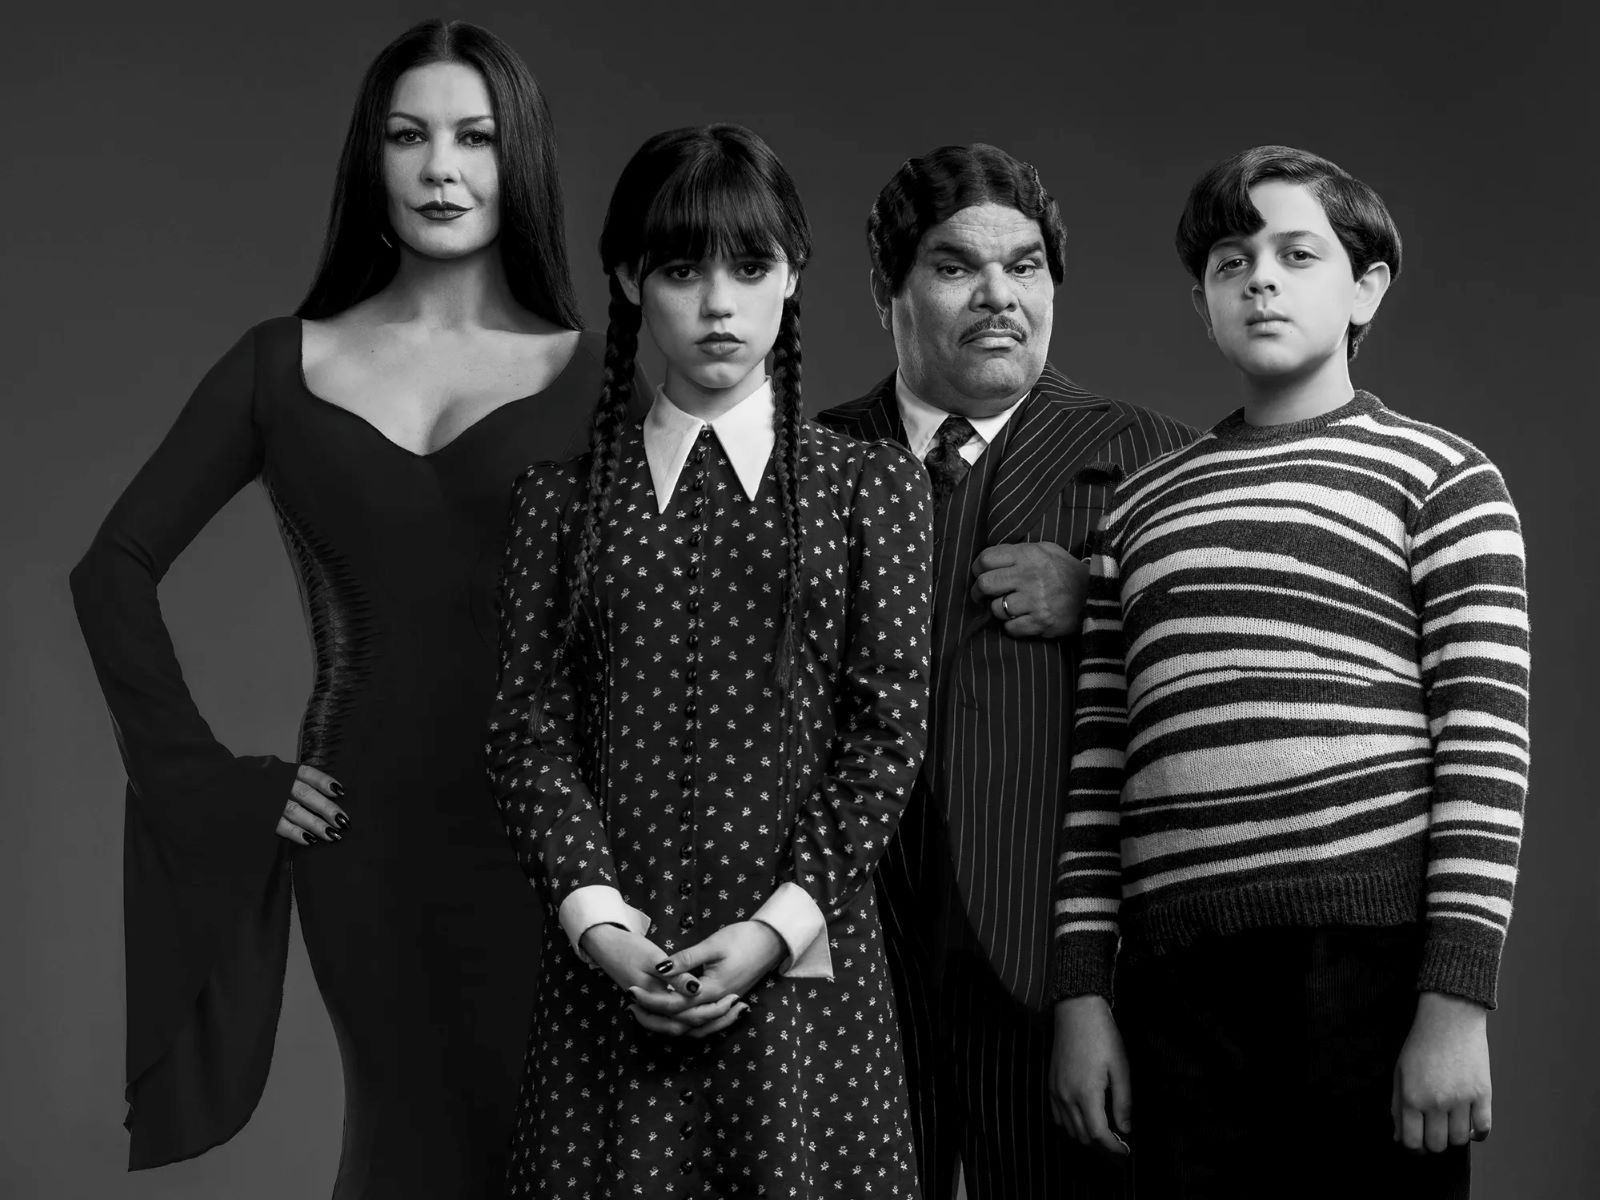 The Mind-Blowing Supernatural Powers Of The Addams Family Revealed!